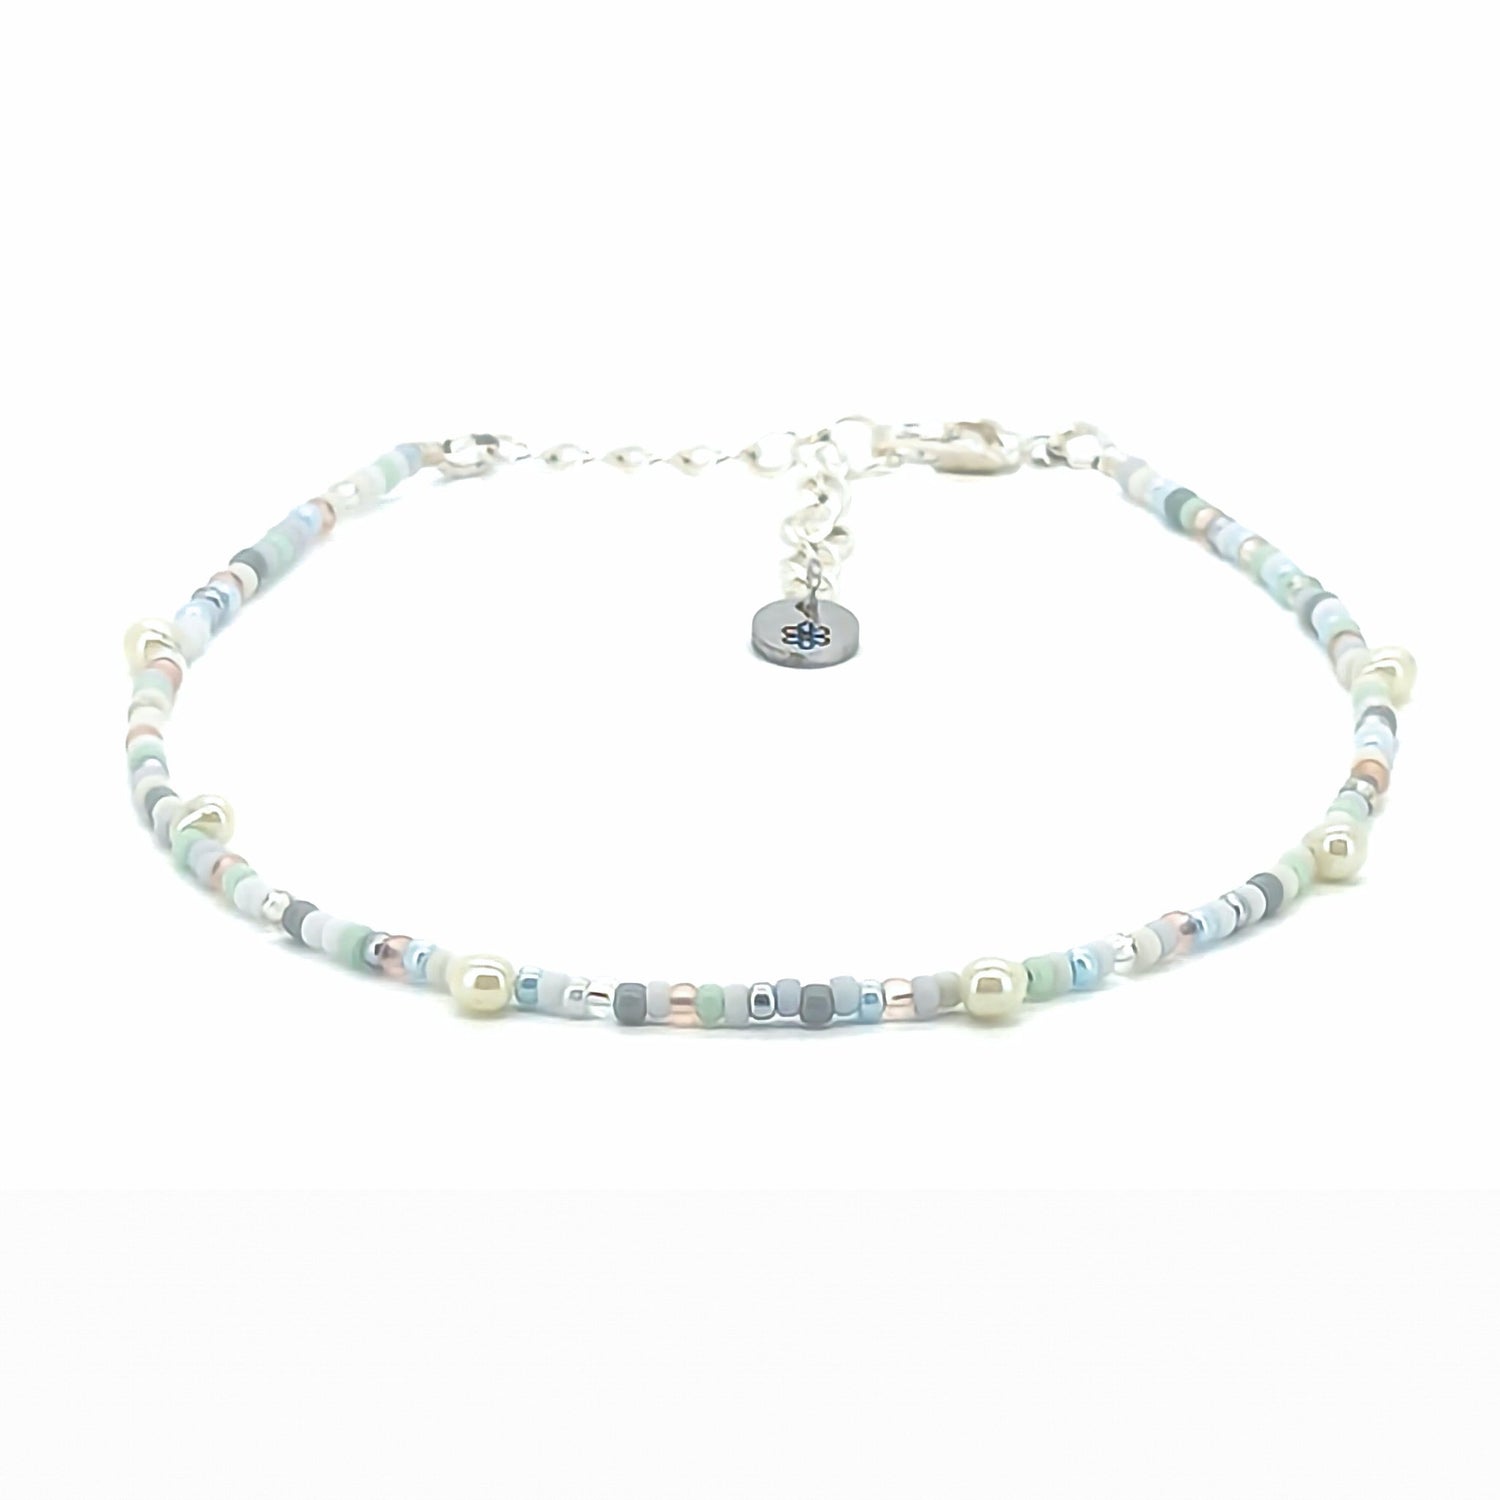 Anklet - Pale Blue, White, Silver w/ White Drop Beads - creations by cherie